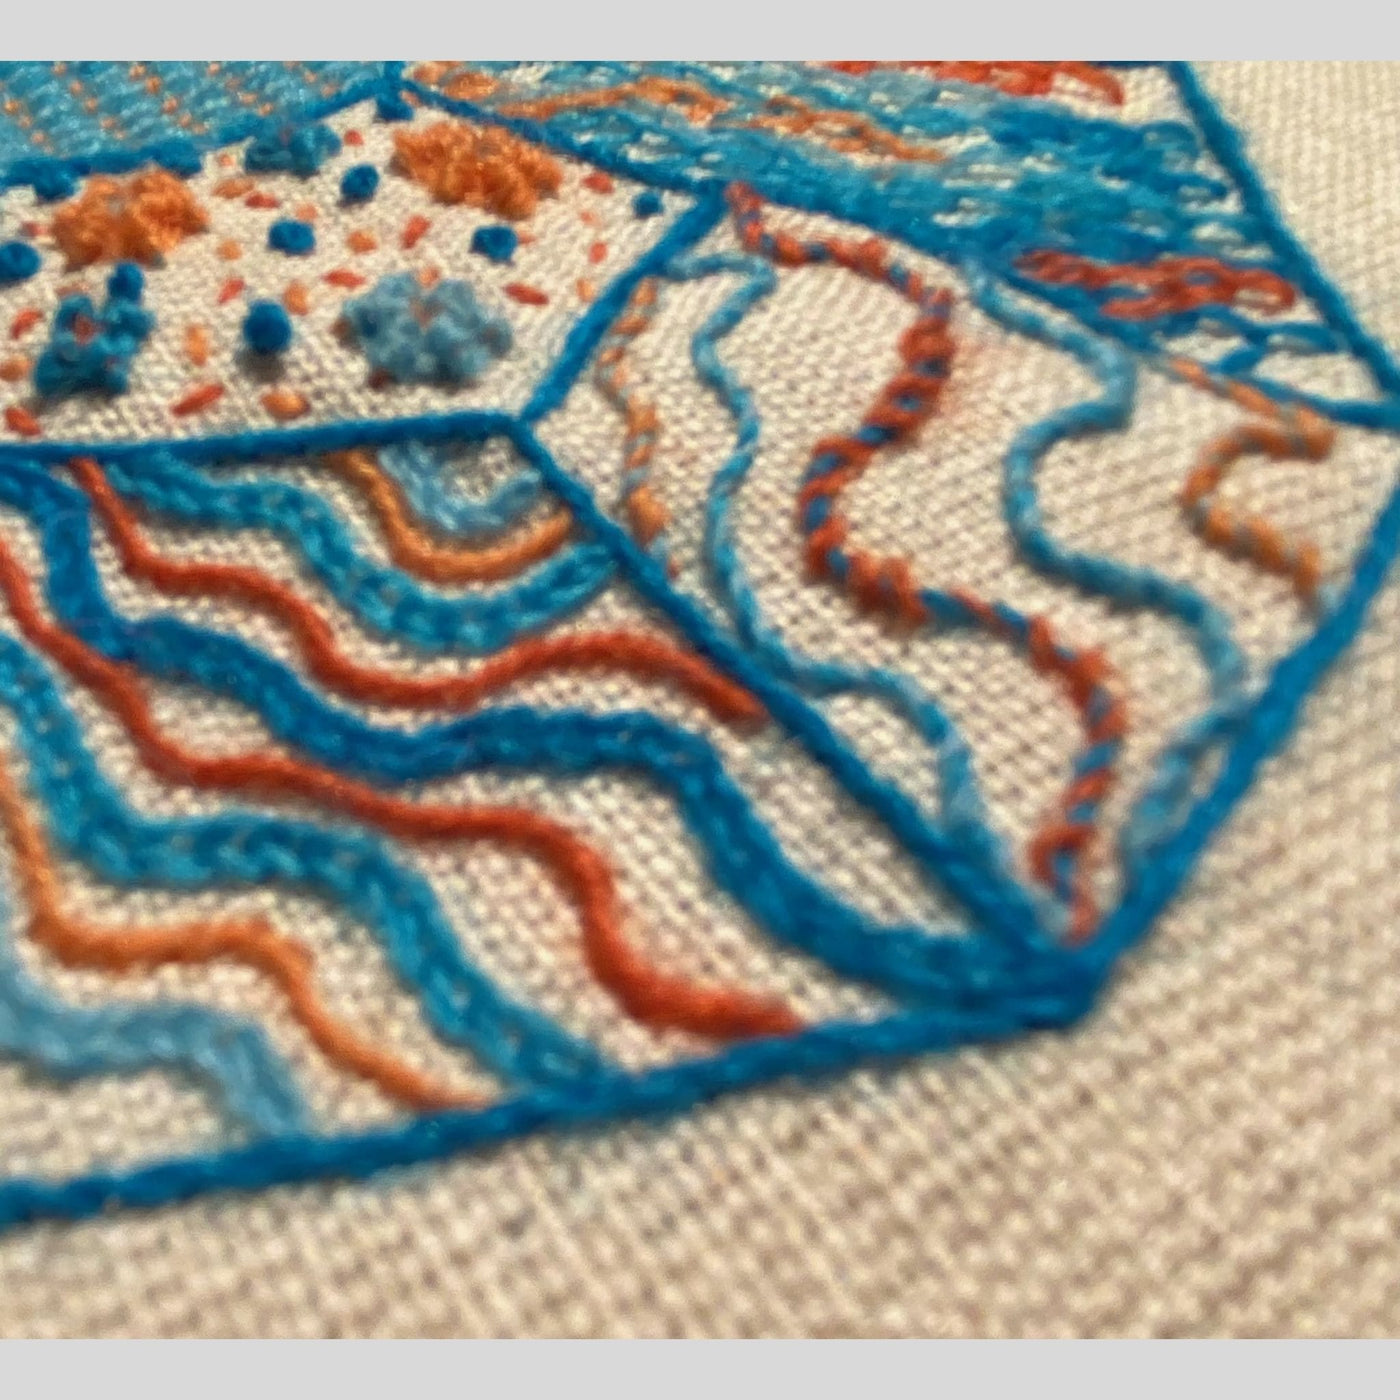 Page from Yarn-The Journal of Scottish Yarns publication. Blue and orange stitches on neutral background.